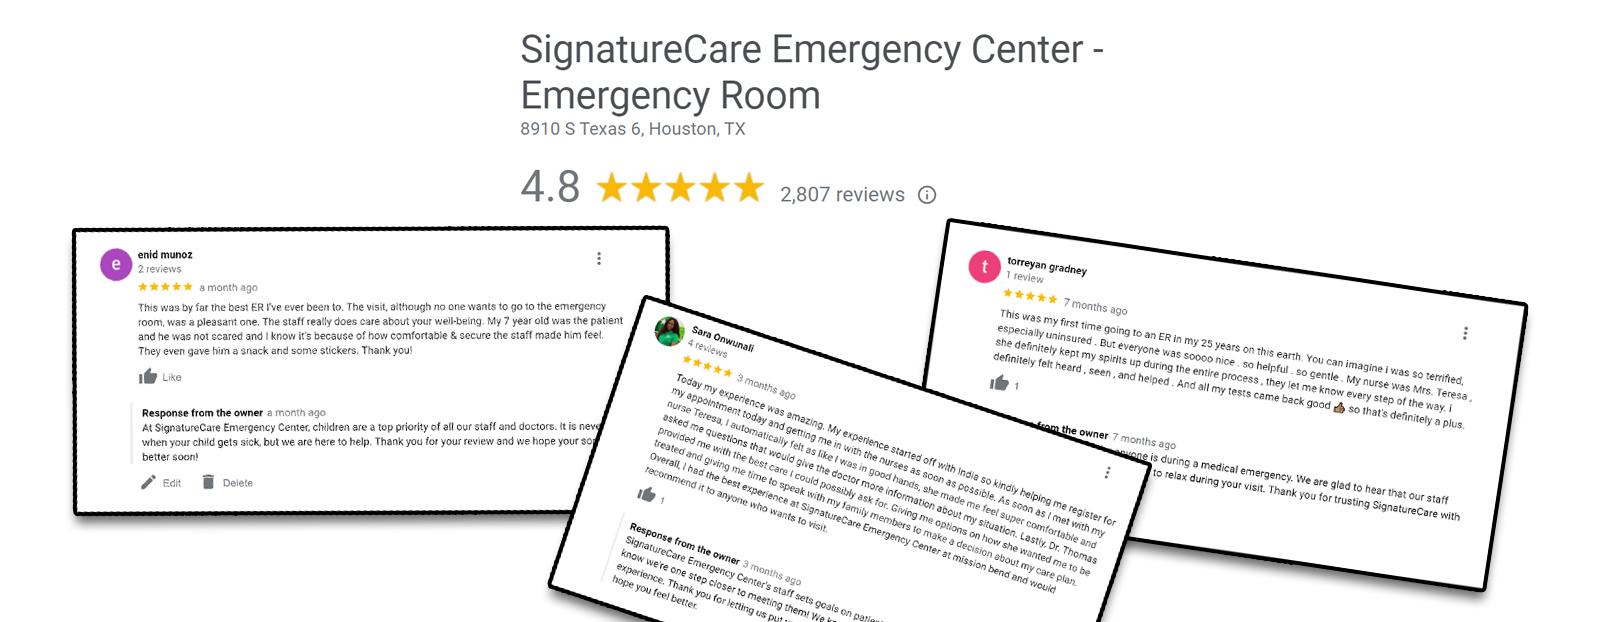 Top Rated Emergency Room on Google